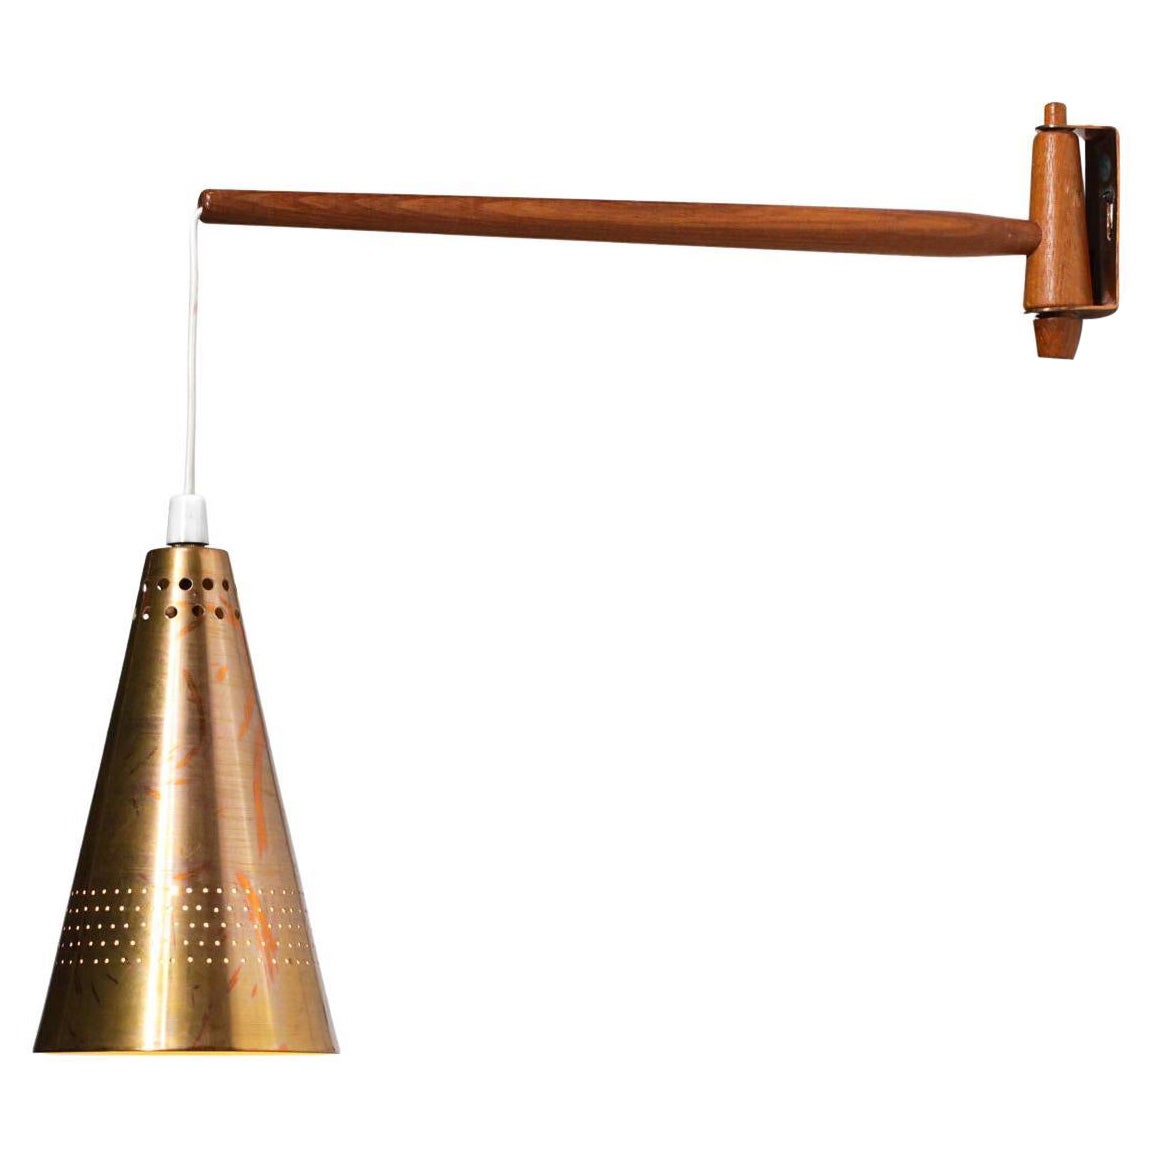 Scandinavian Wall Lamp Hans Agne Jakobsson in Copper and Teak from the 60s F444